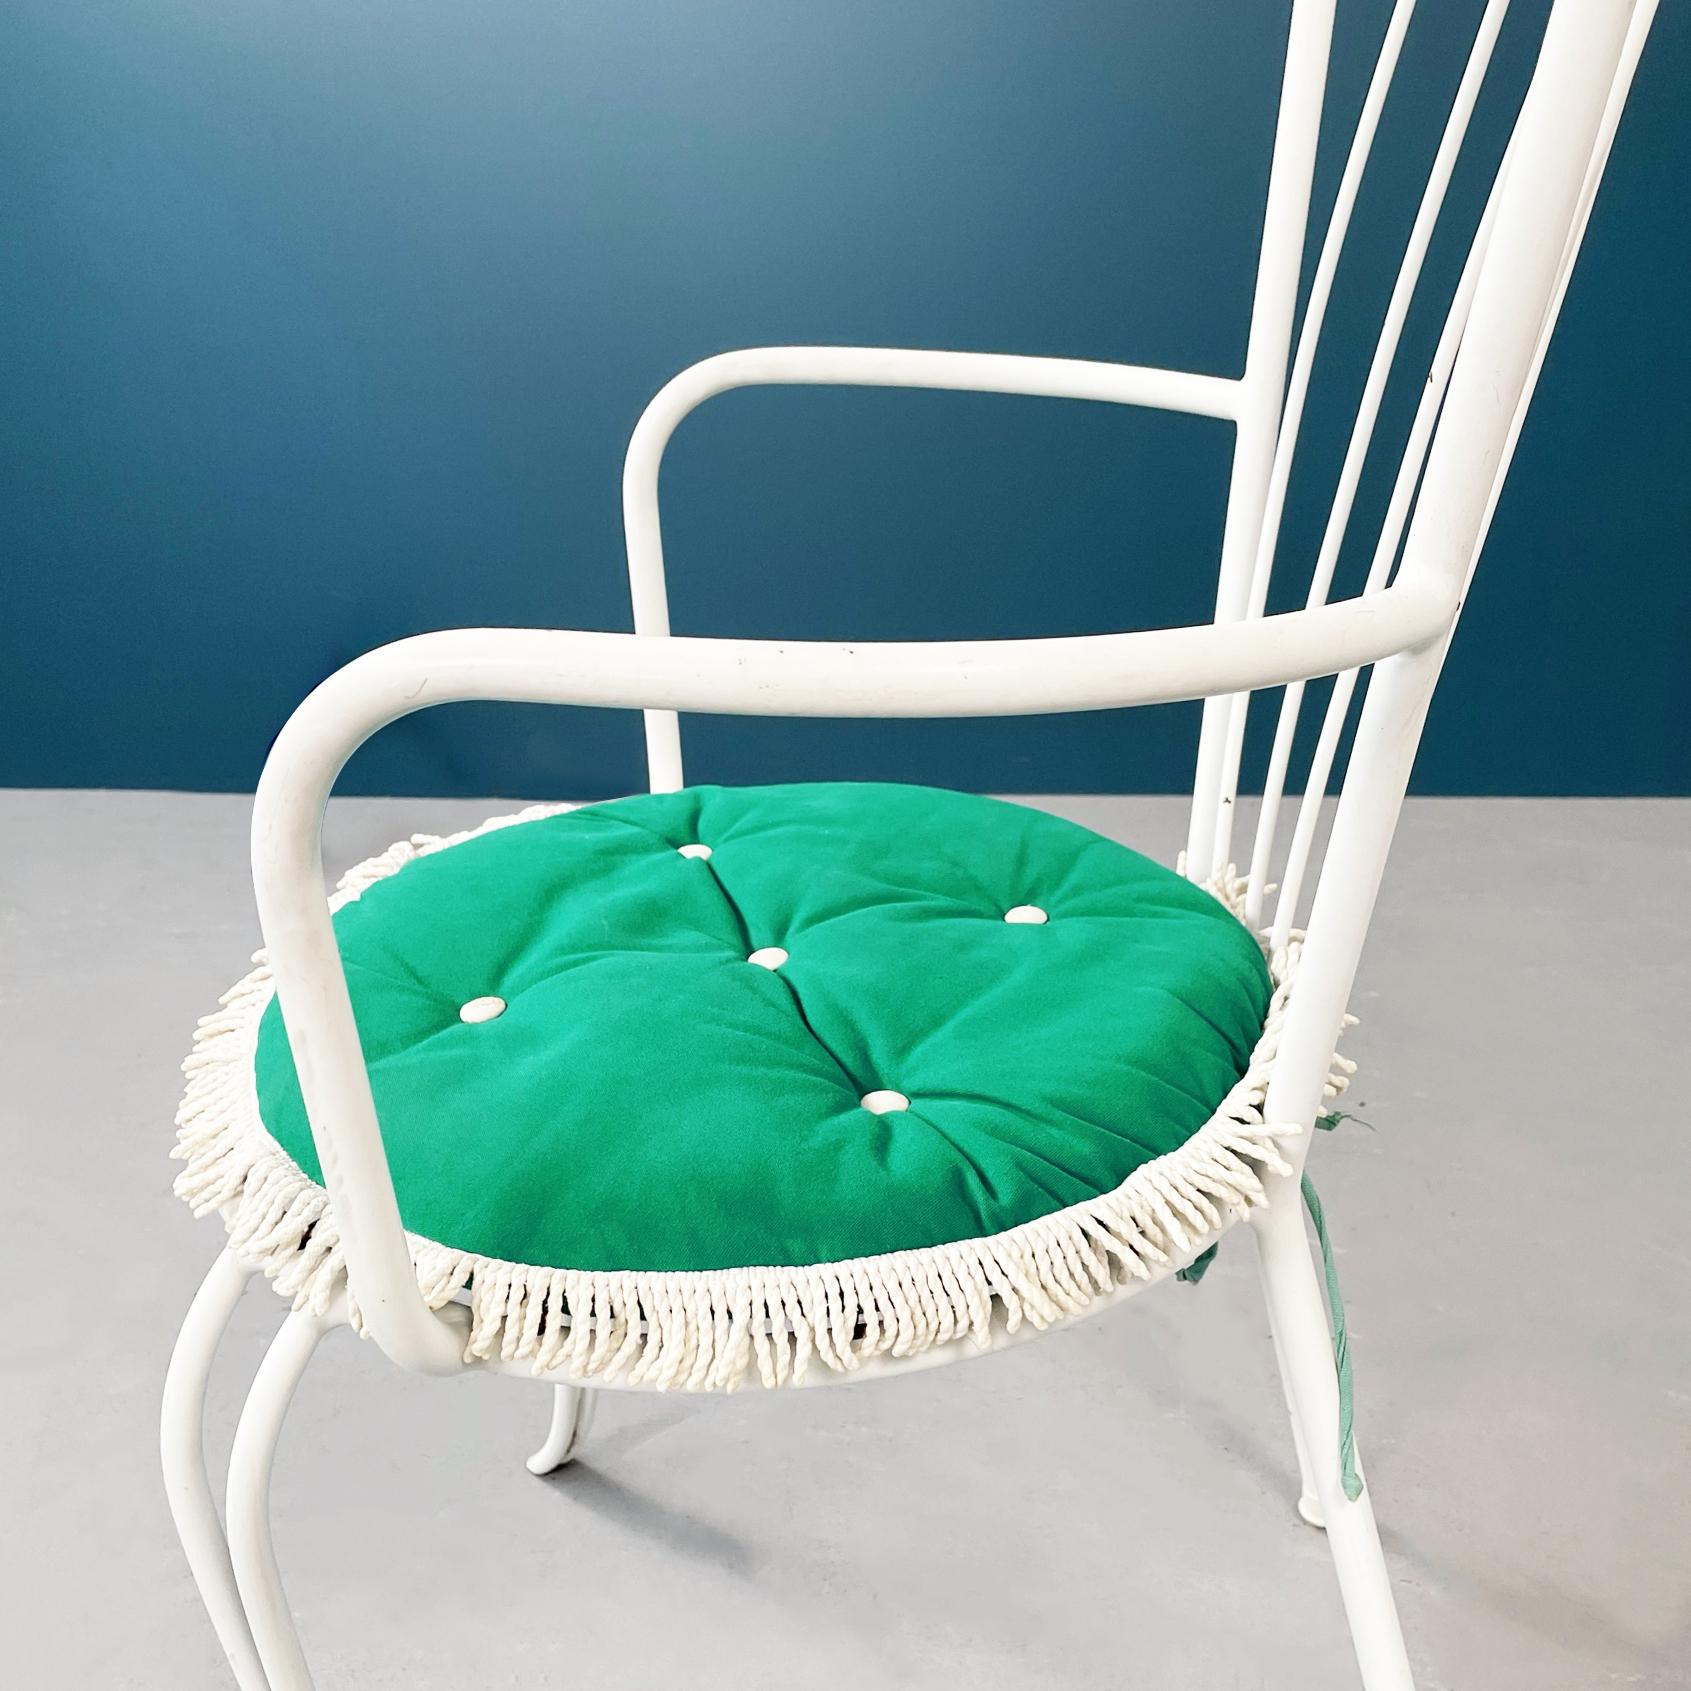 Italian Mid-Century Garden Chairs in White Wrought Iron and Green Fabric, 1960s For Sale 7